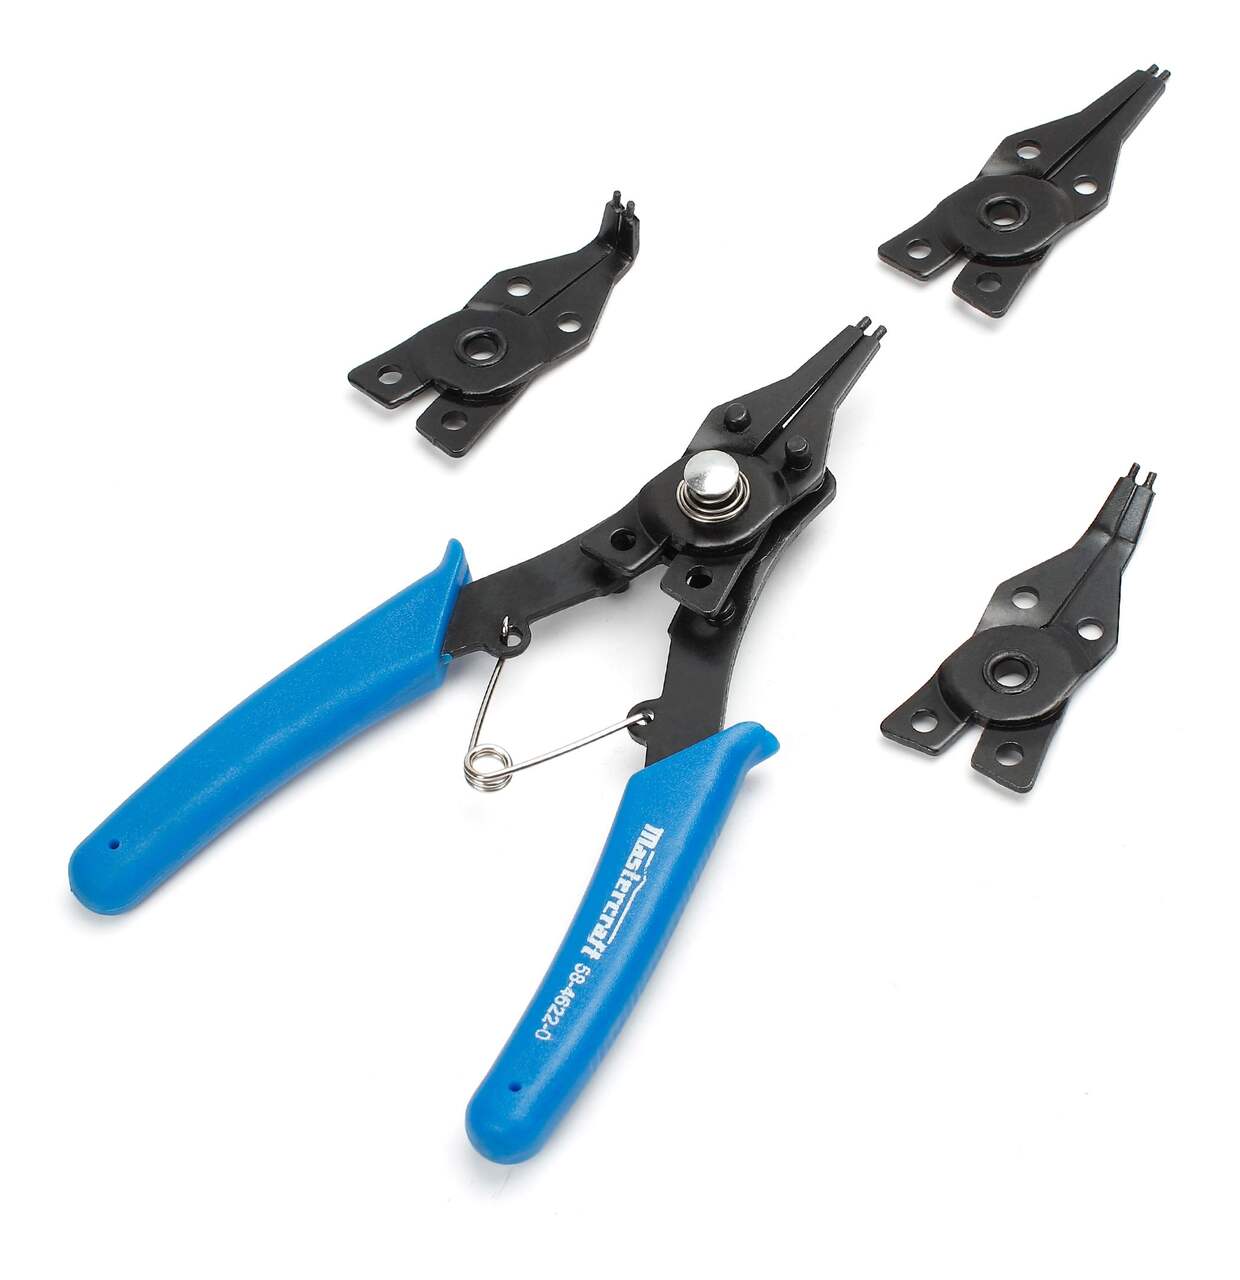 https://media-www.canadiantire.ca/product/fixing/tools/metal-working/0584622/snap-ring-plier-set-mastercraft-ba9486ec-7971-4bfe-ae69-4e0a196876b6-jpgrendition.jpg?imdensity=1&imwidth=1244&impolicy=mZoom